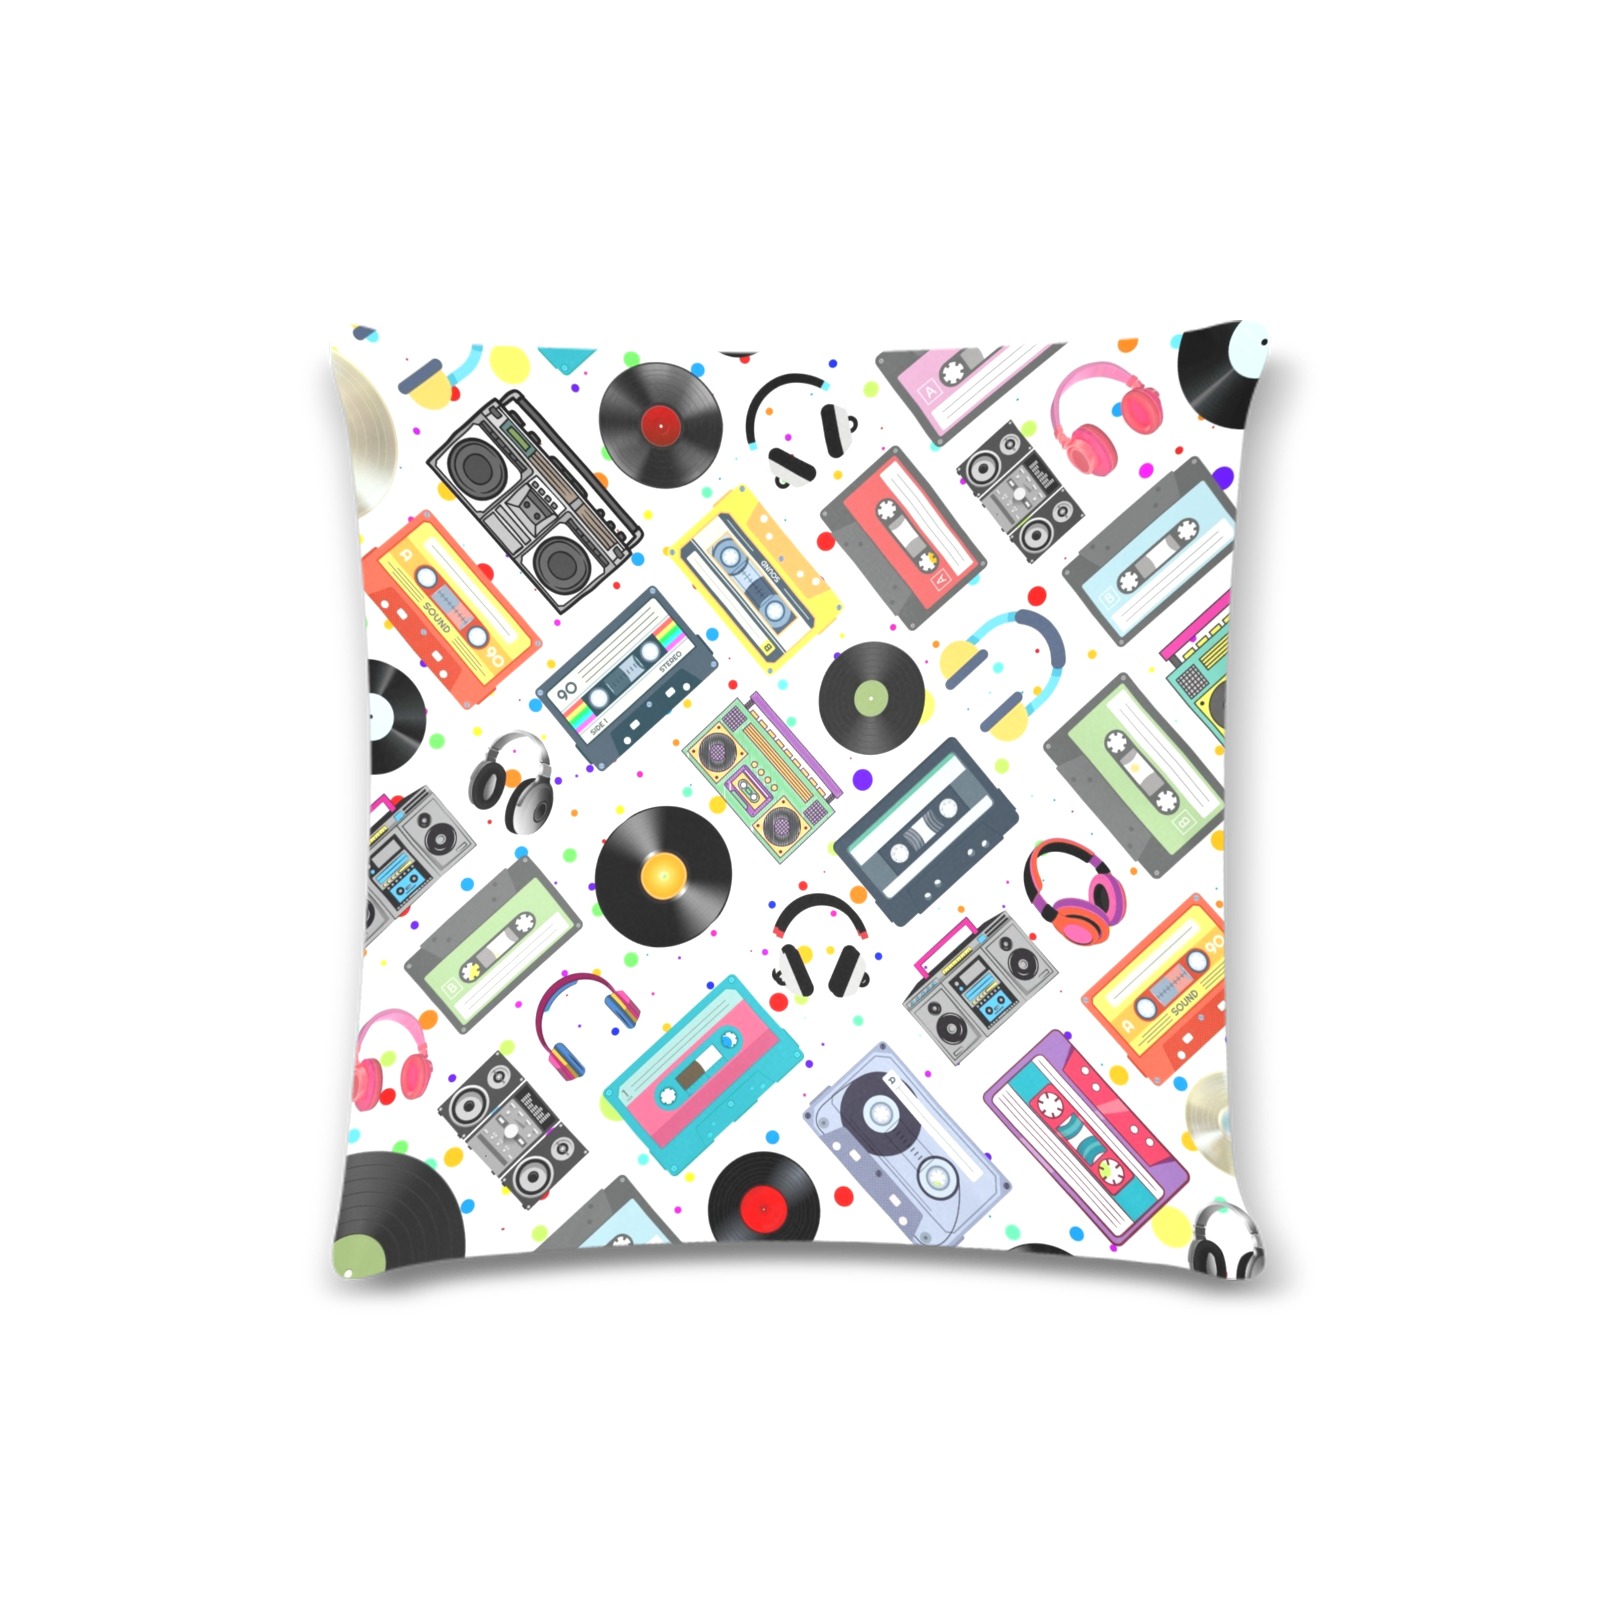 Retro Music Artistic Pillow Case 16" x 16"(one side). Custom Zippered Pillow Case 16"x16" (one side)